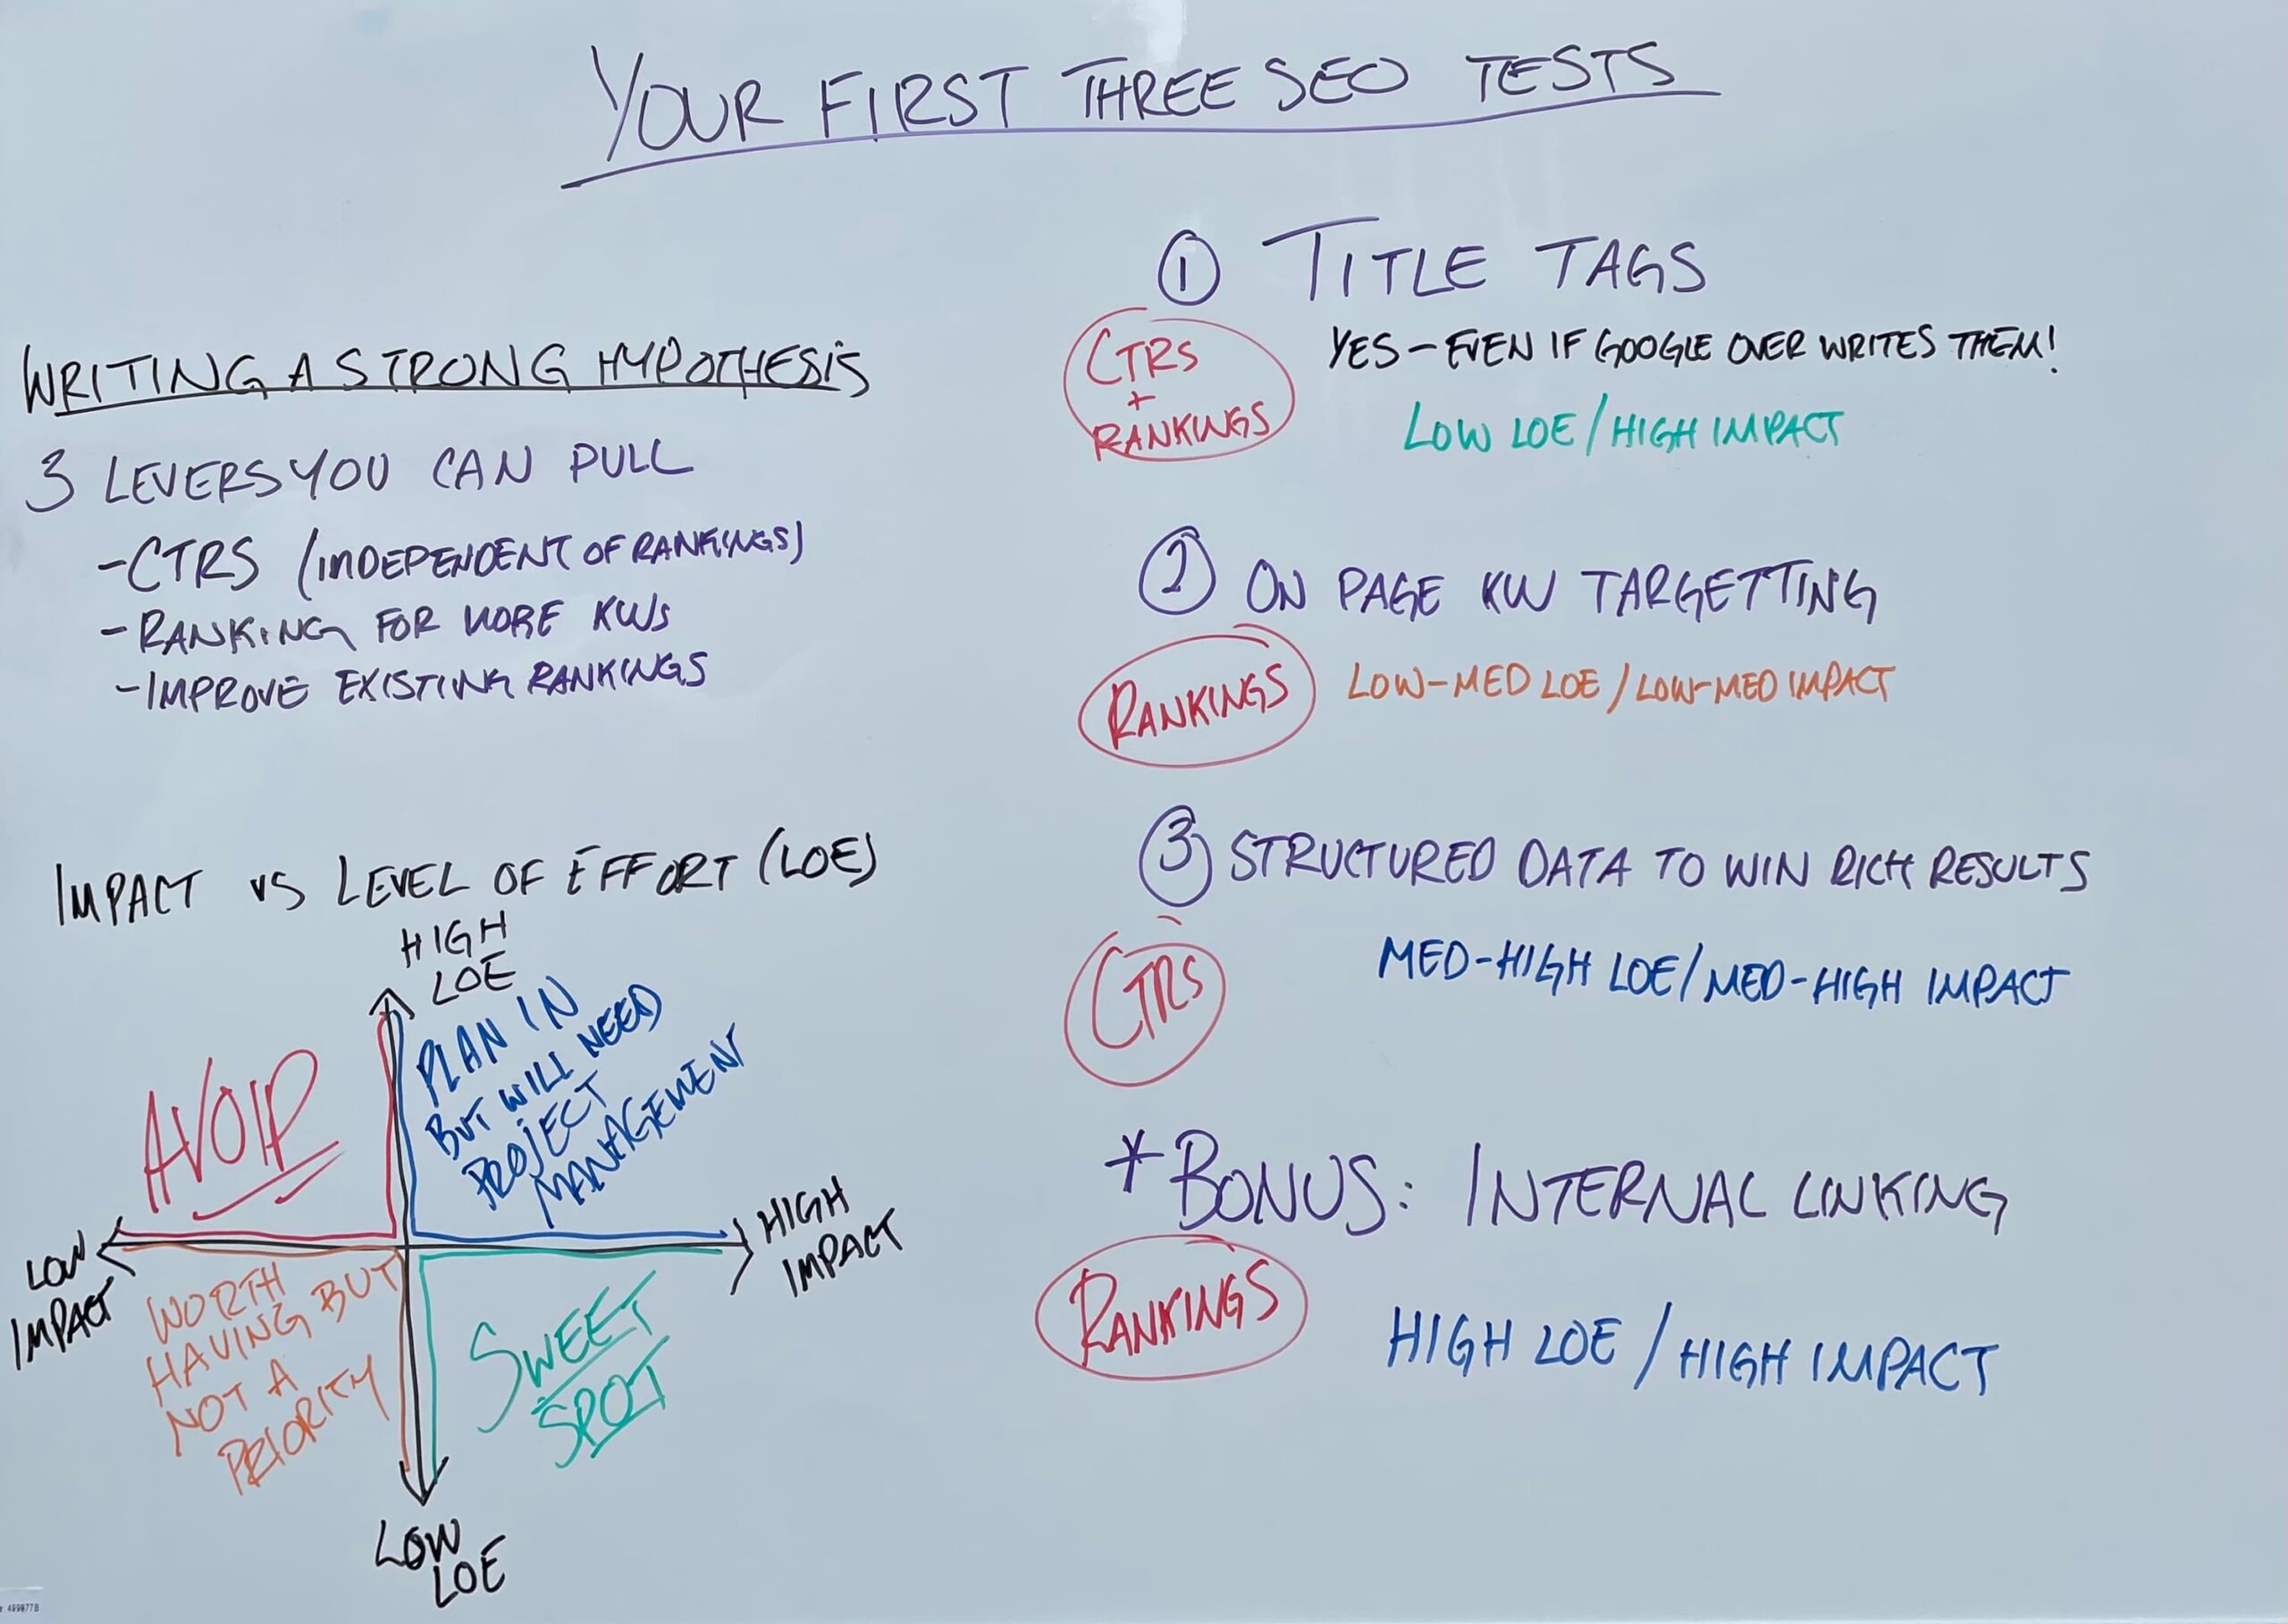 whiteboard with three SEO tests to try